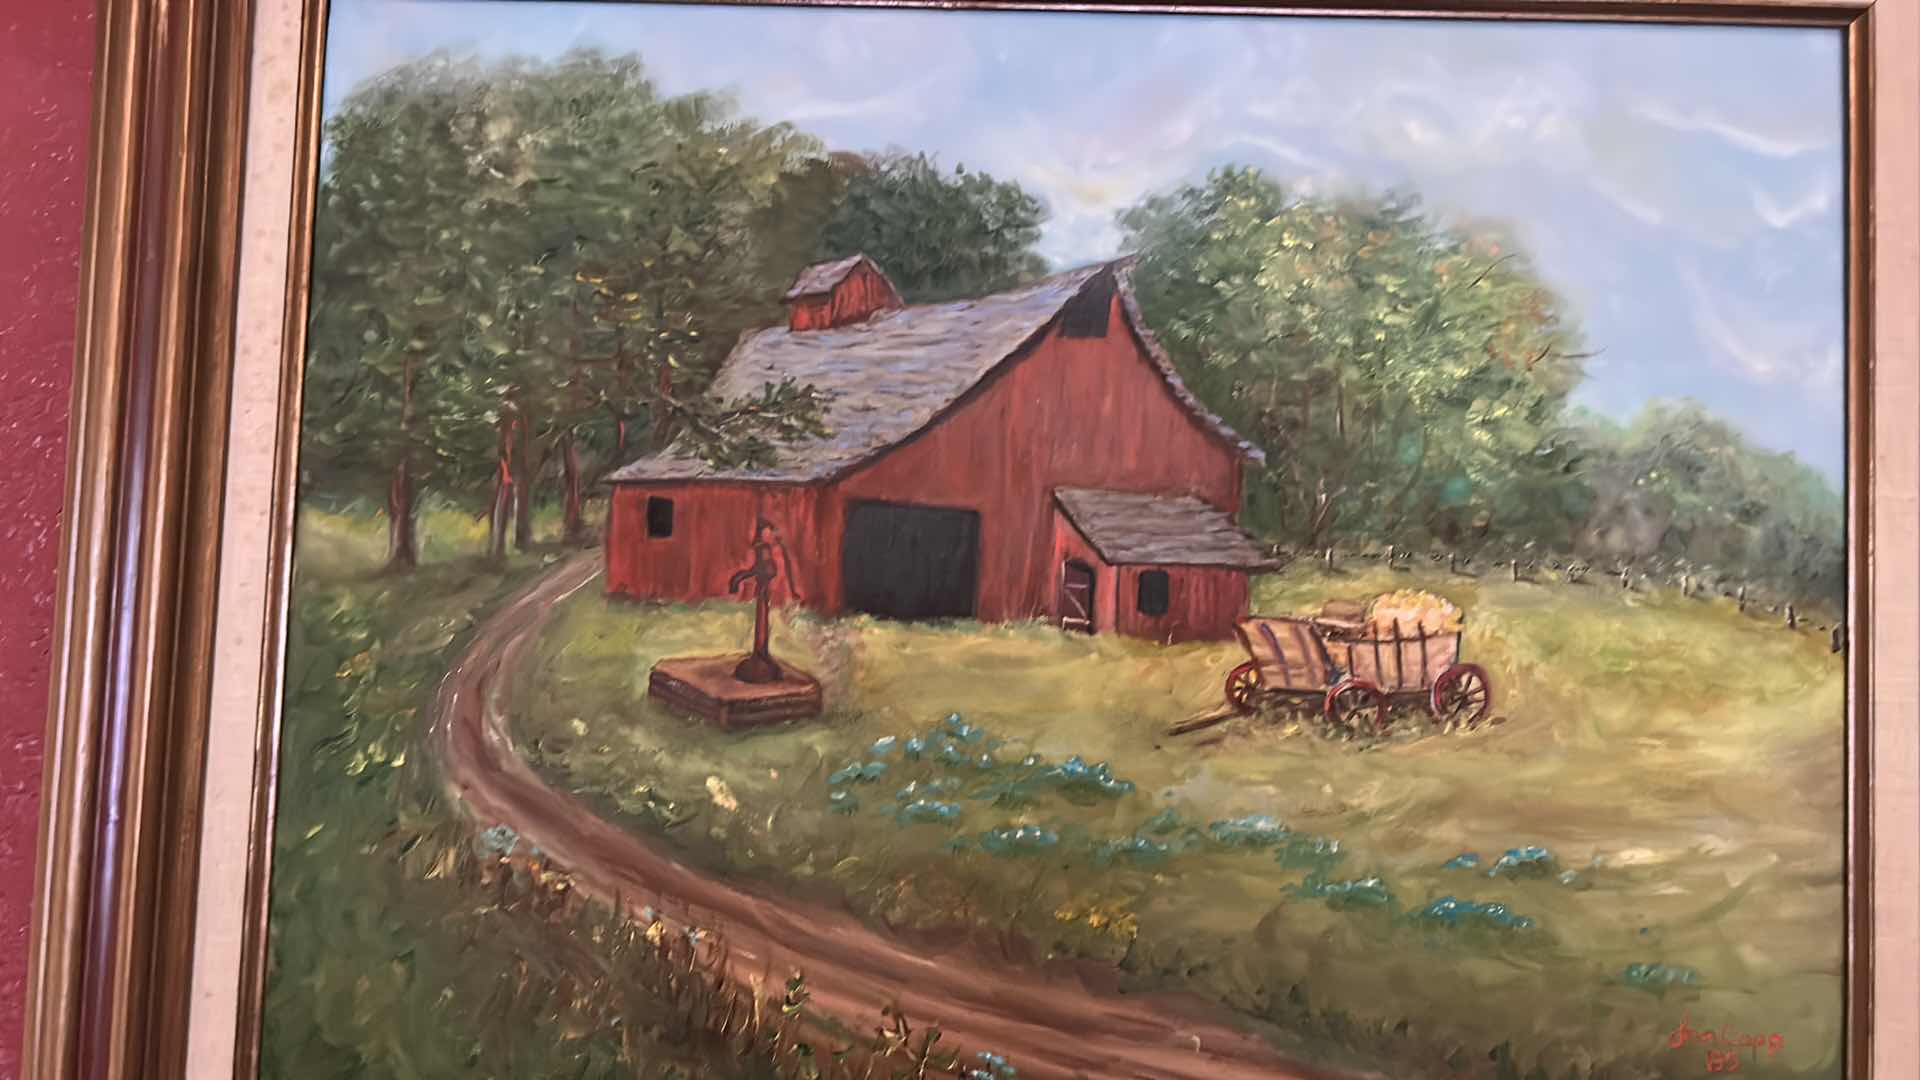 Photo 3 of SIGNED OIL ON CANVAS “RED BARN” WOOD FRAMED 31” x 25”